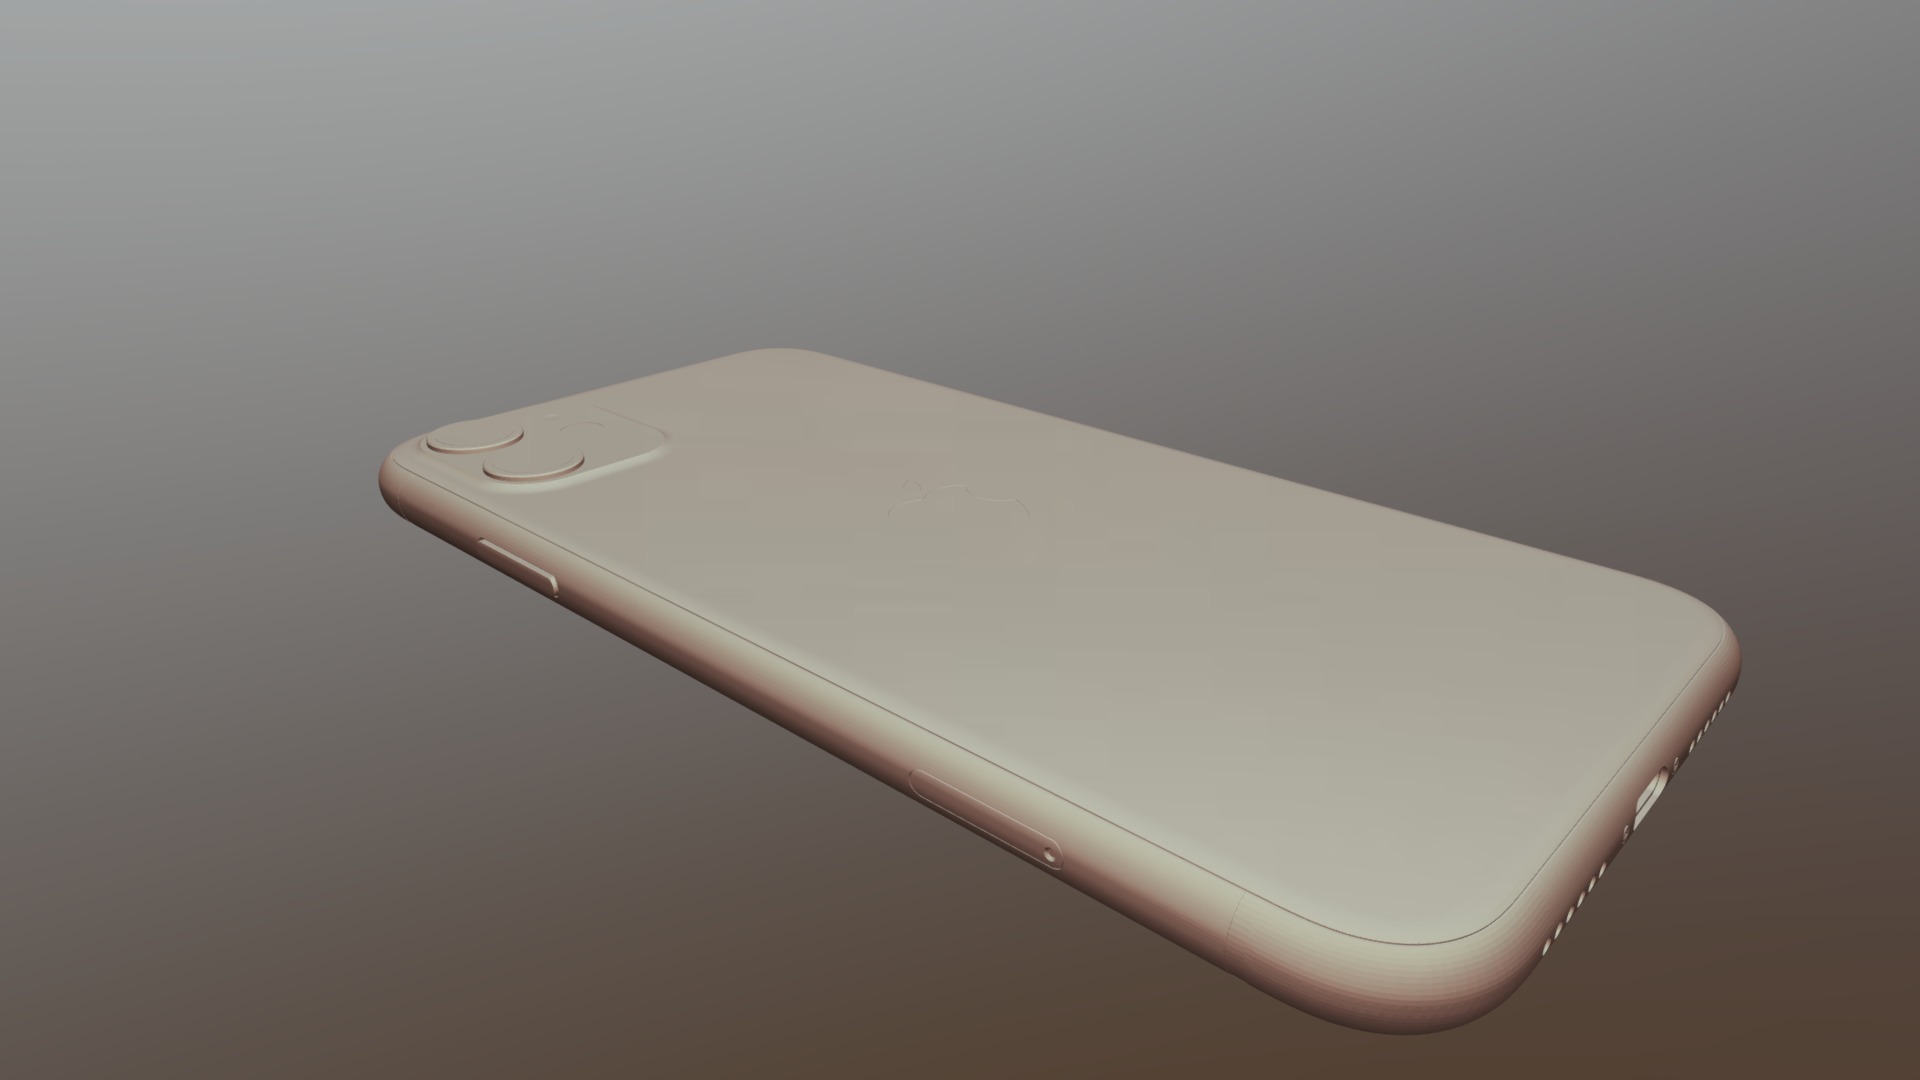 3D model iPhone 11 – original Apple dimensions - This is a 3D model of the iPhone 11 - original Apple dimensions. The 3D model is about a close-up of a cell phone.